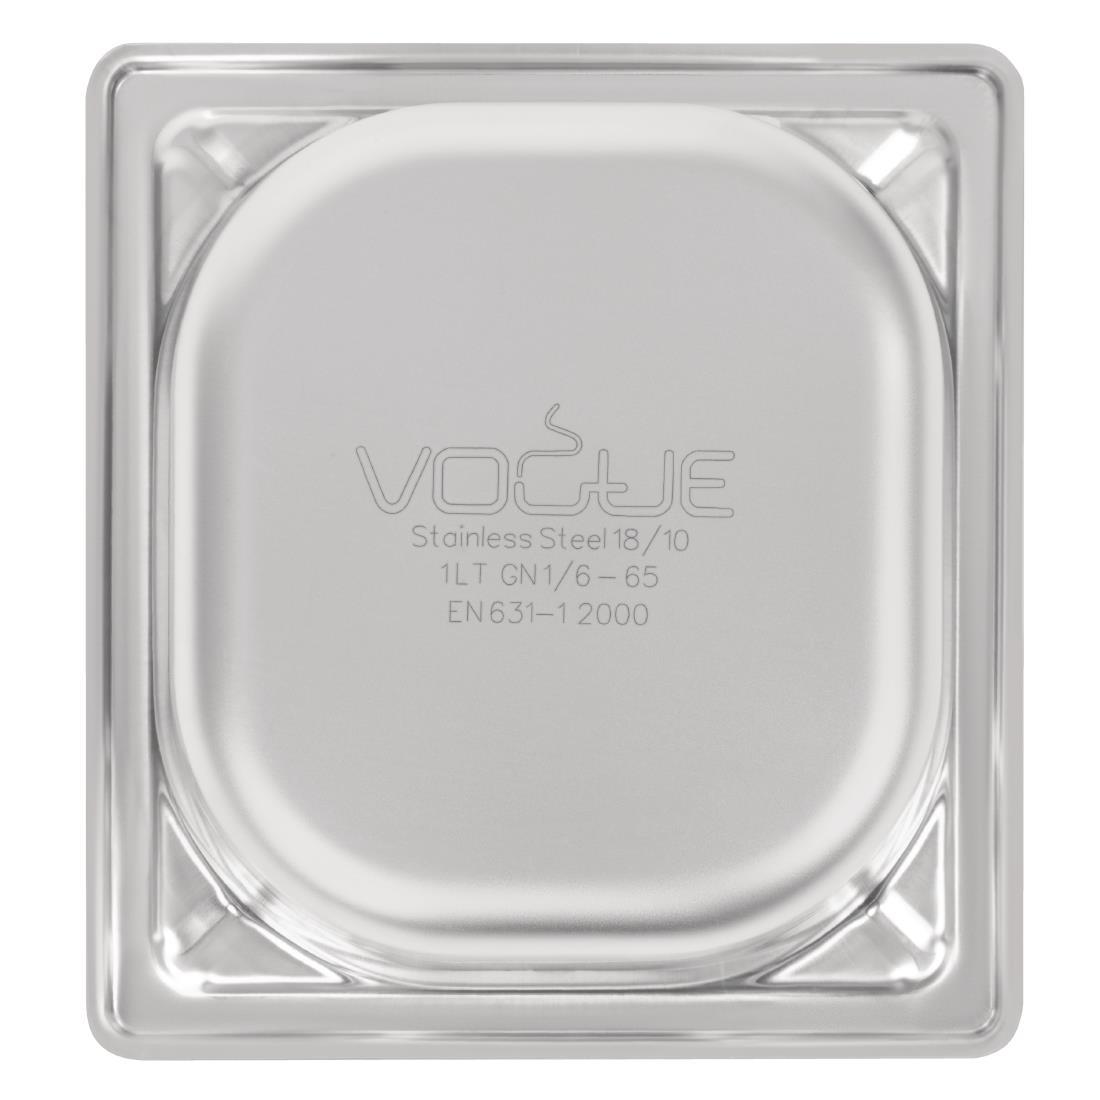 Vogue Heavy Duty Stainless Steel 1/6 Gastronorm Pan 65mm - DW449  - 6